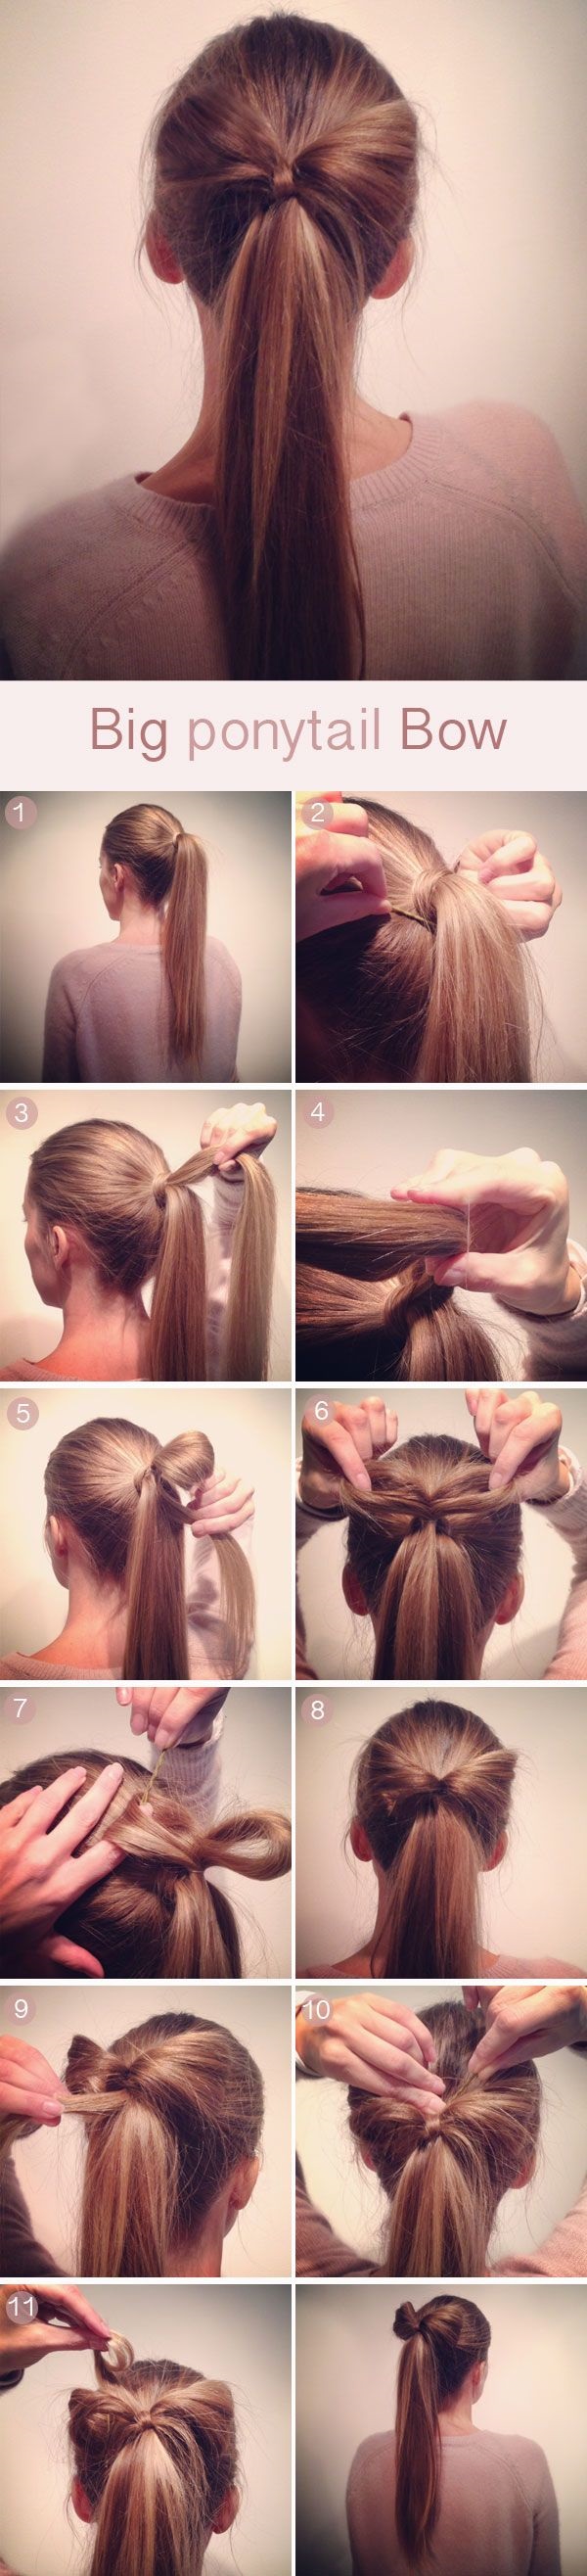 Simple Five Minute Hairstyles (53)